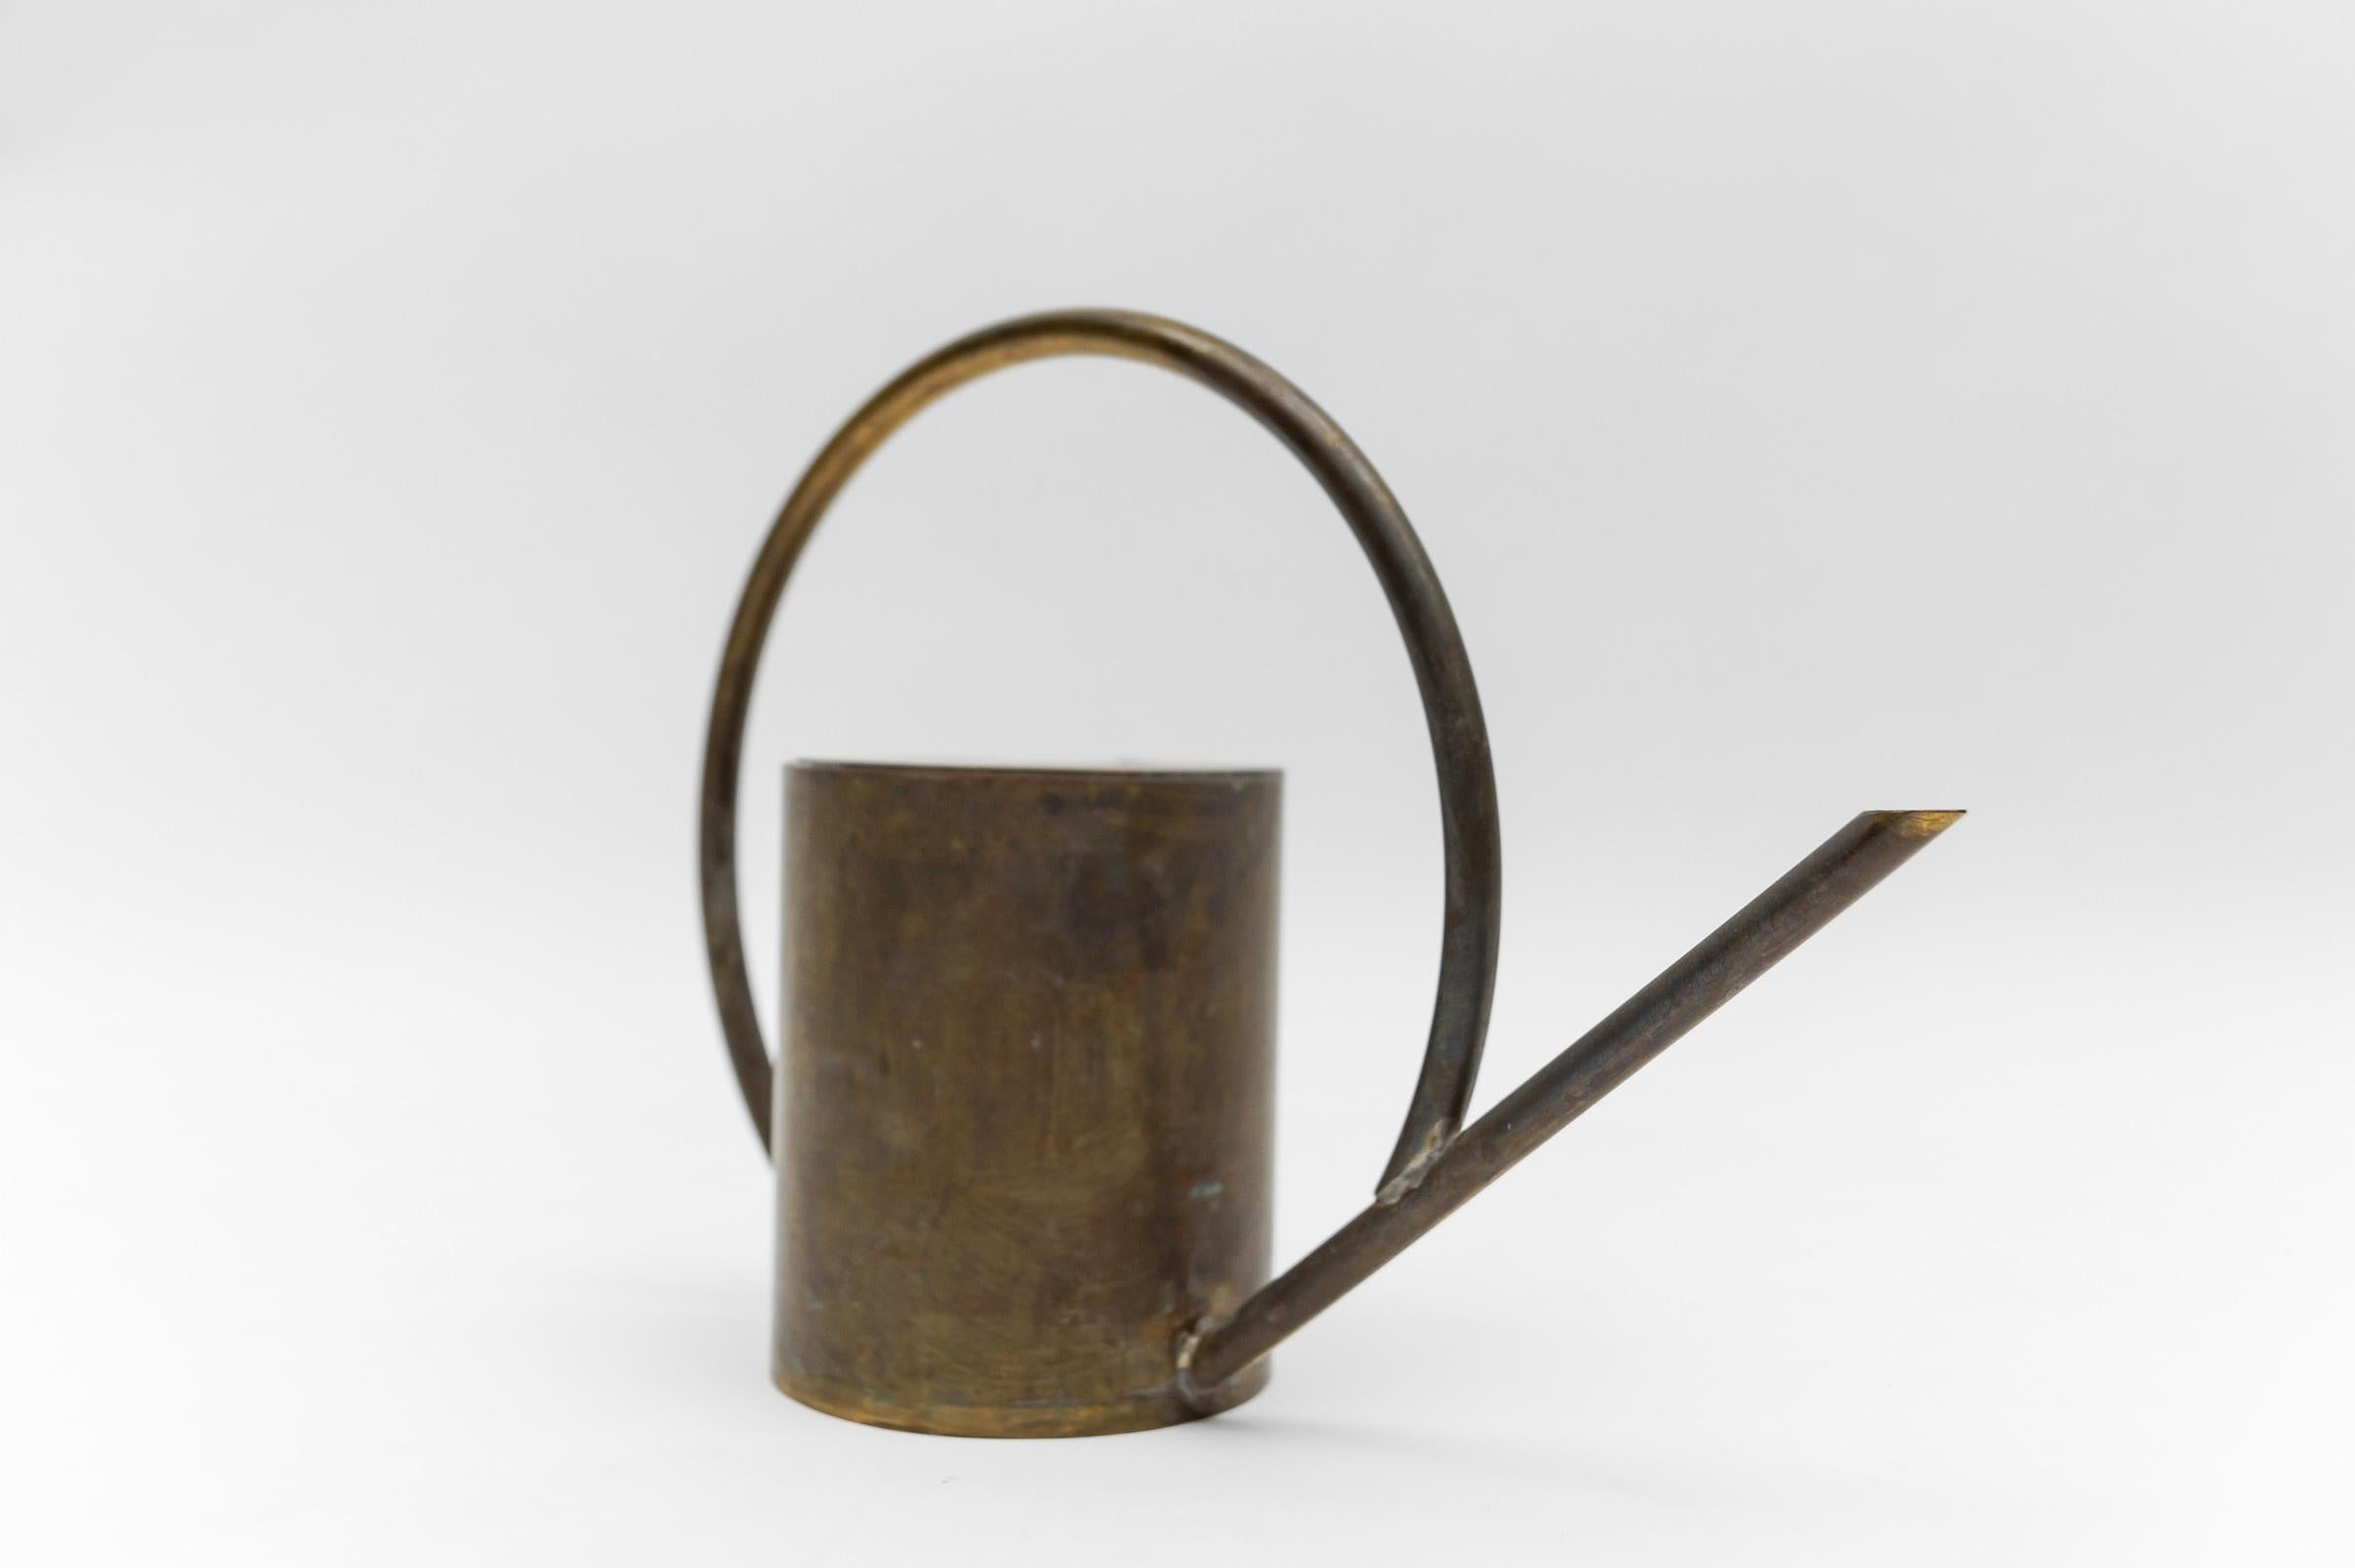 Mid-Century Modern Art Deco Bauhaus  Watering Can in Massive Brass, 1930s / 1940s Germany For Sale